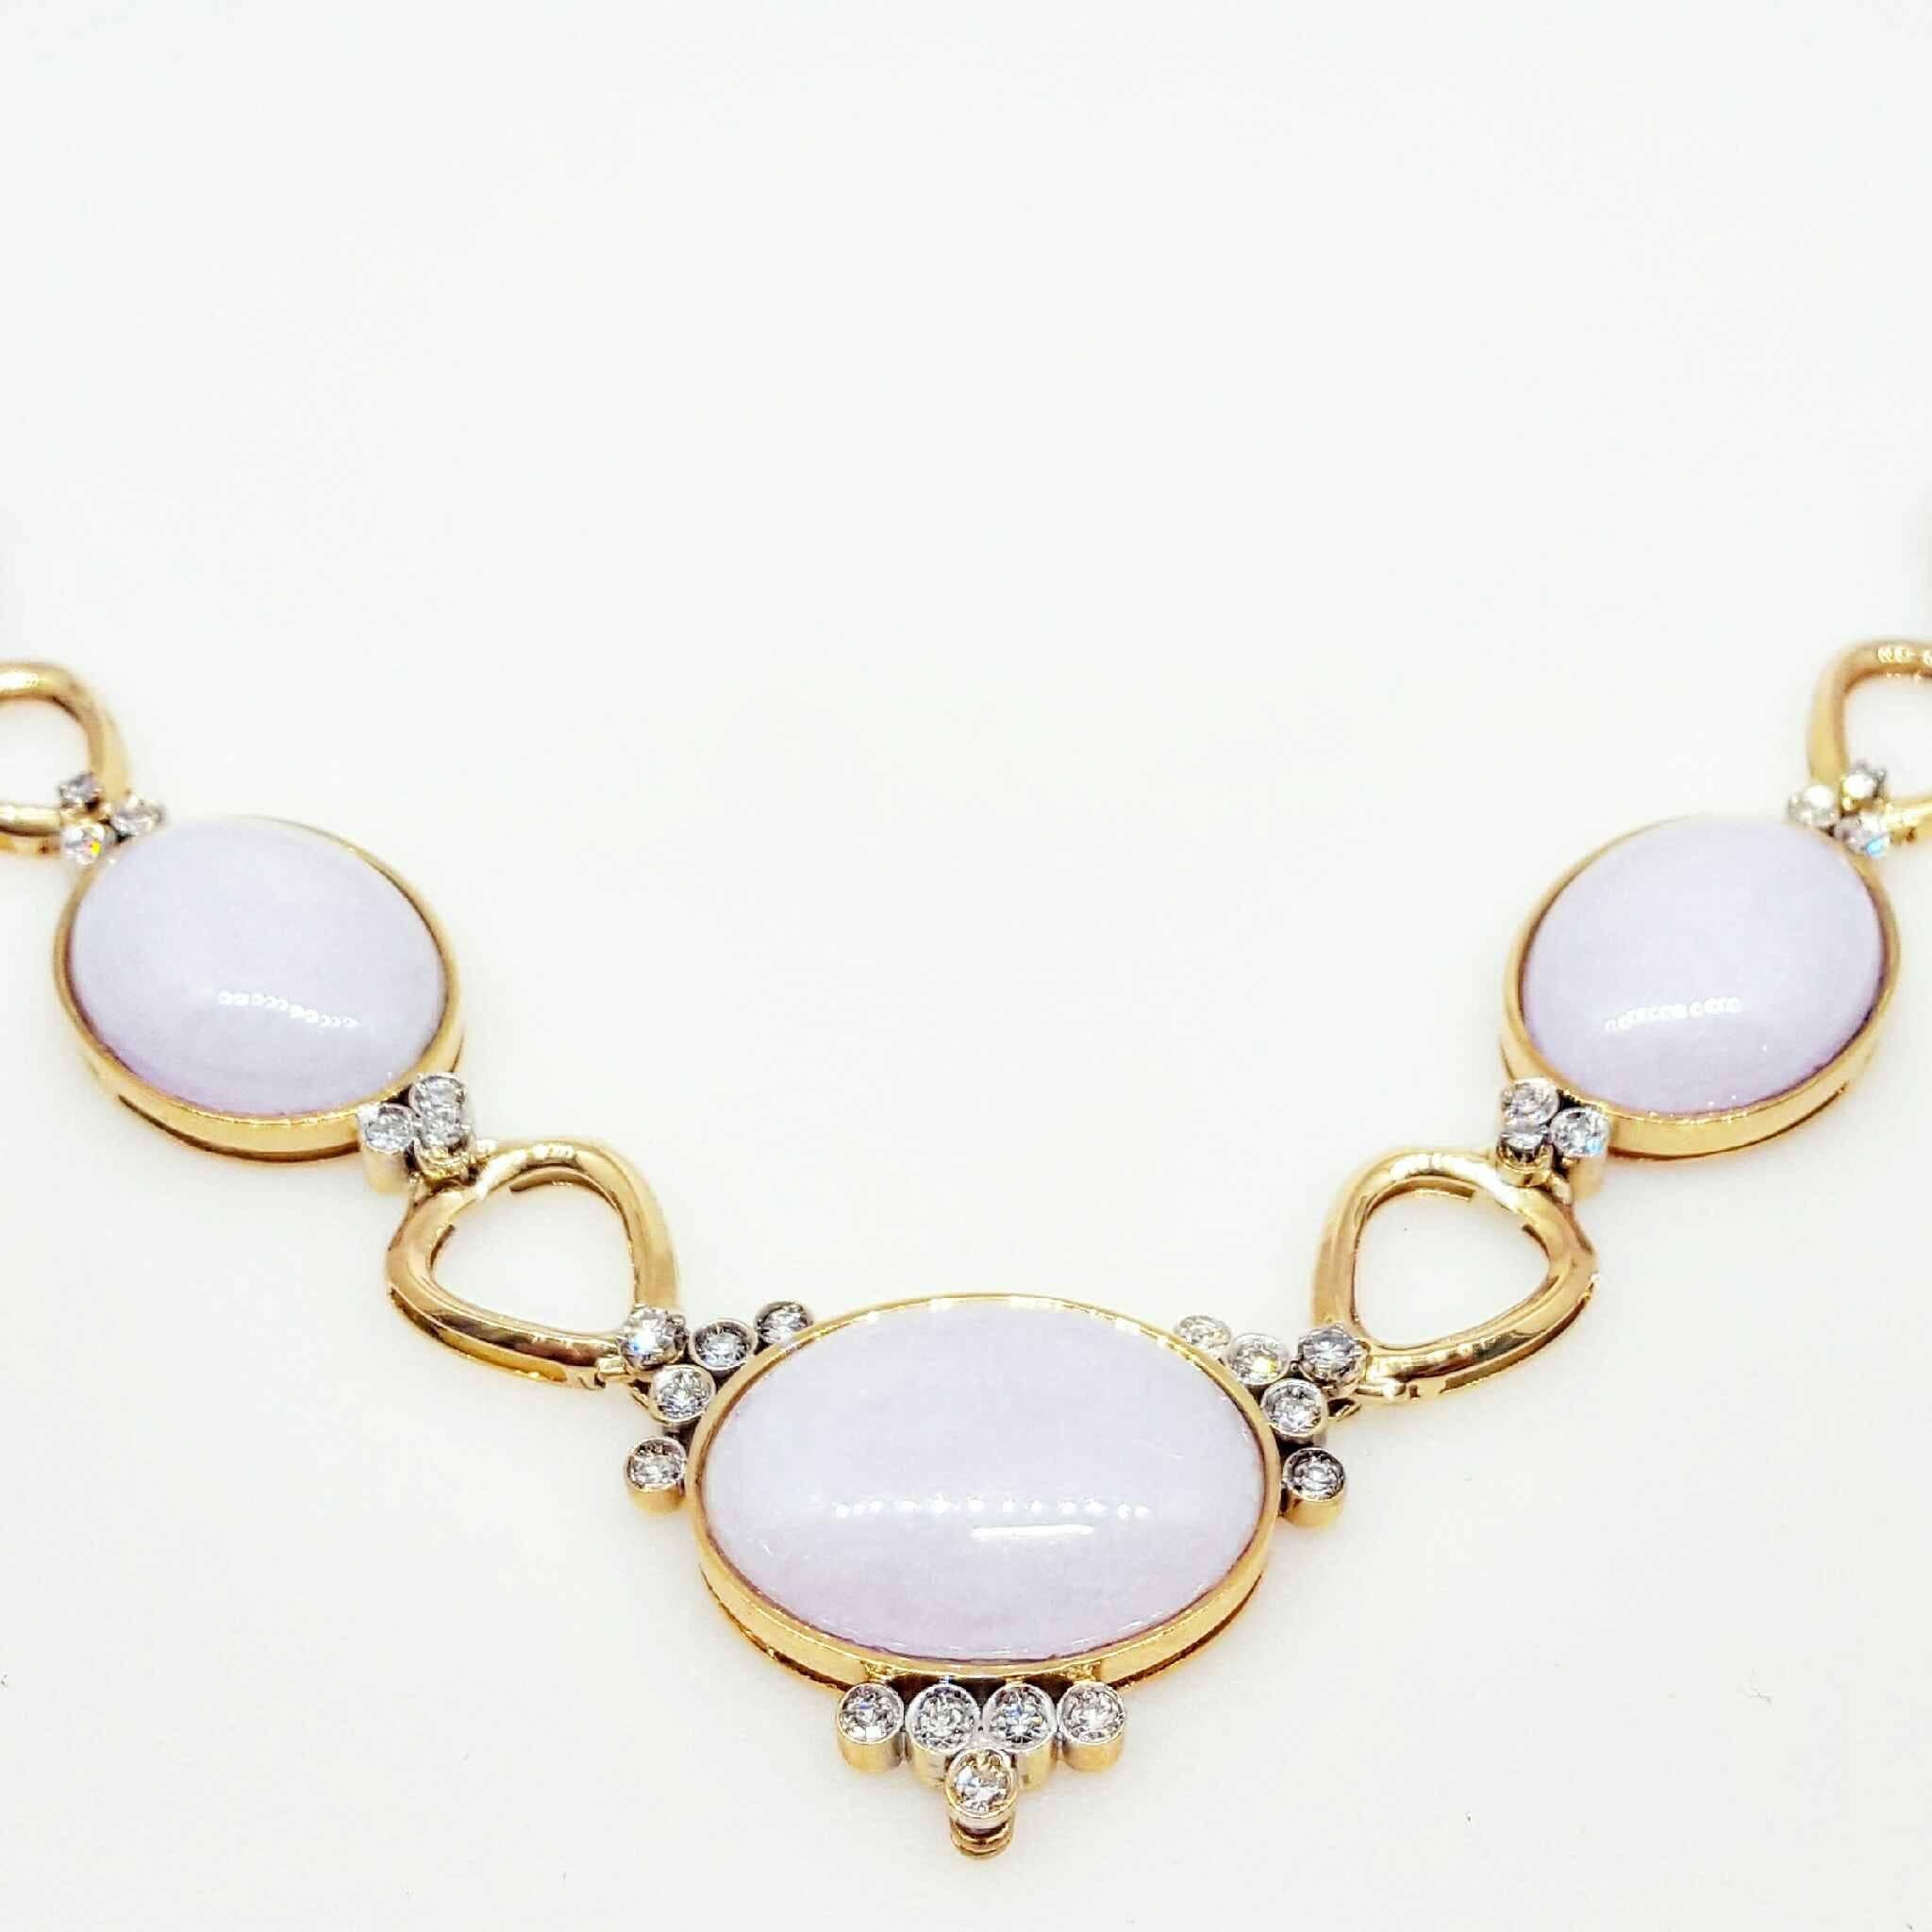 Beautiful necklace set with five, exquisite, oval shaped lavender jade stones. The necklace also is set with an approximate 3.00cttw of, stunning, bezel set, diamonds. The necklace is made of 18 karat yellow gold and is 23 inches long.